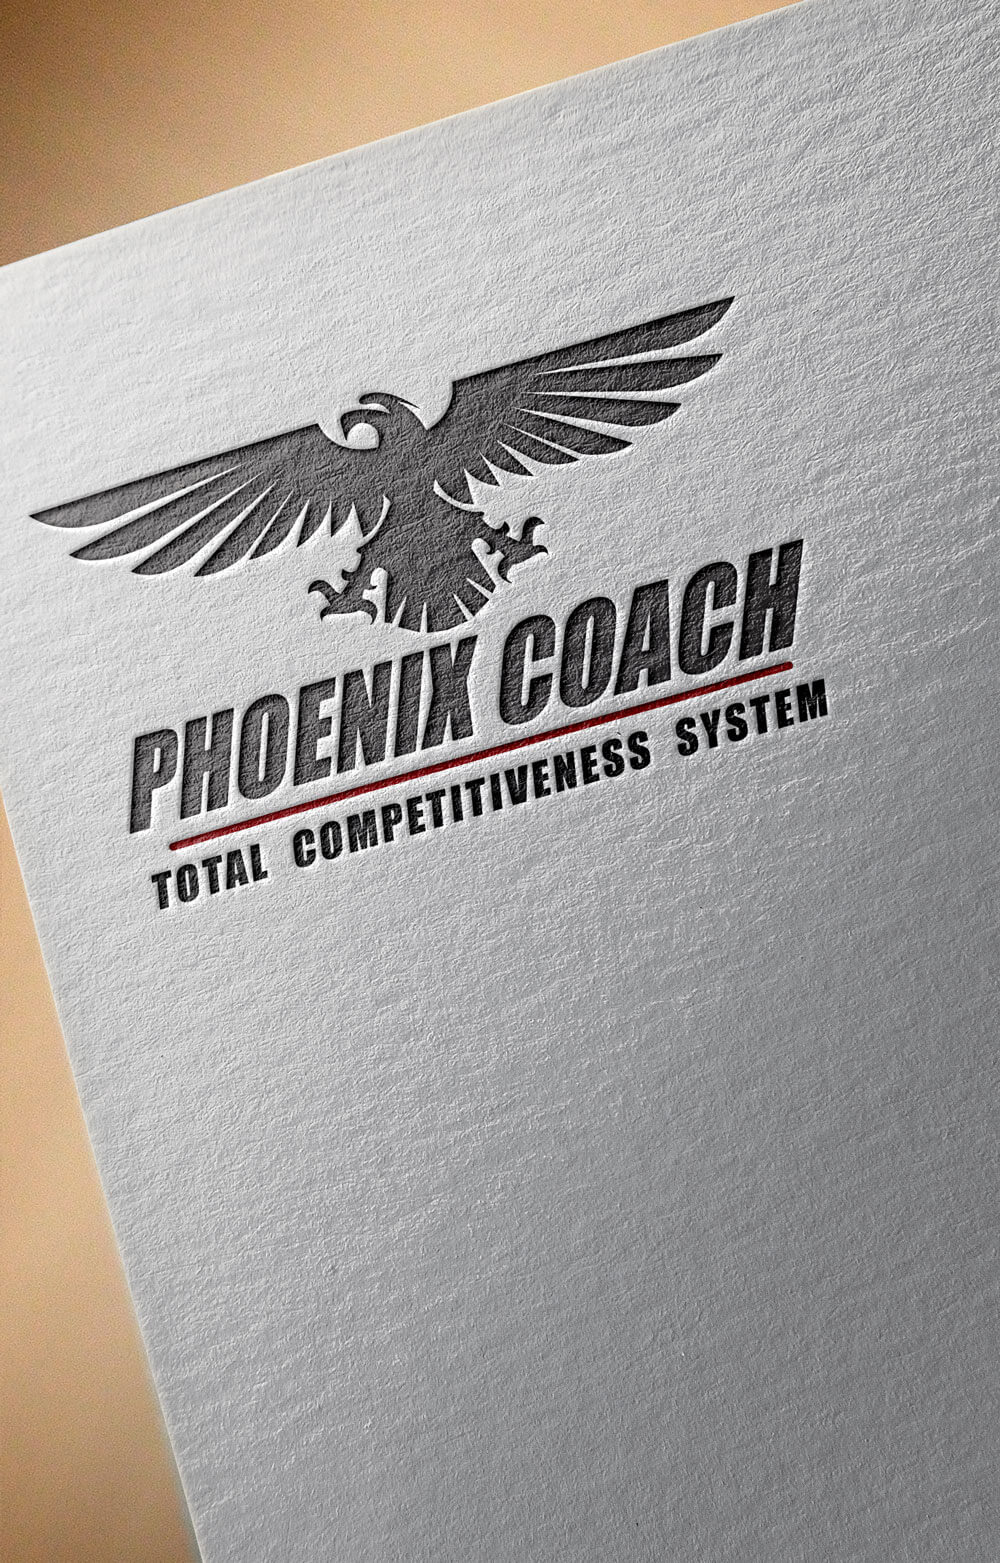 Phoenix Coach Total Competitiveness System